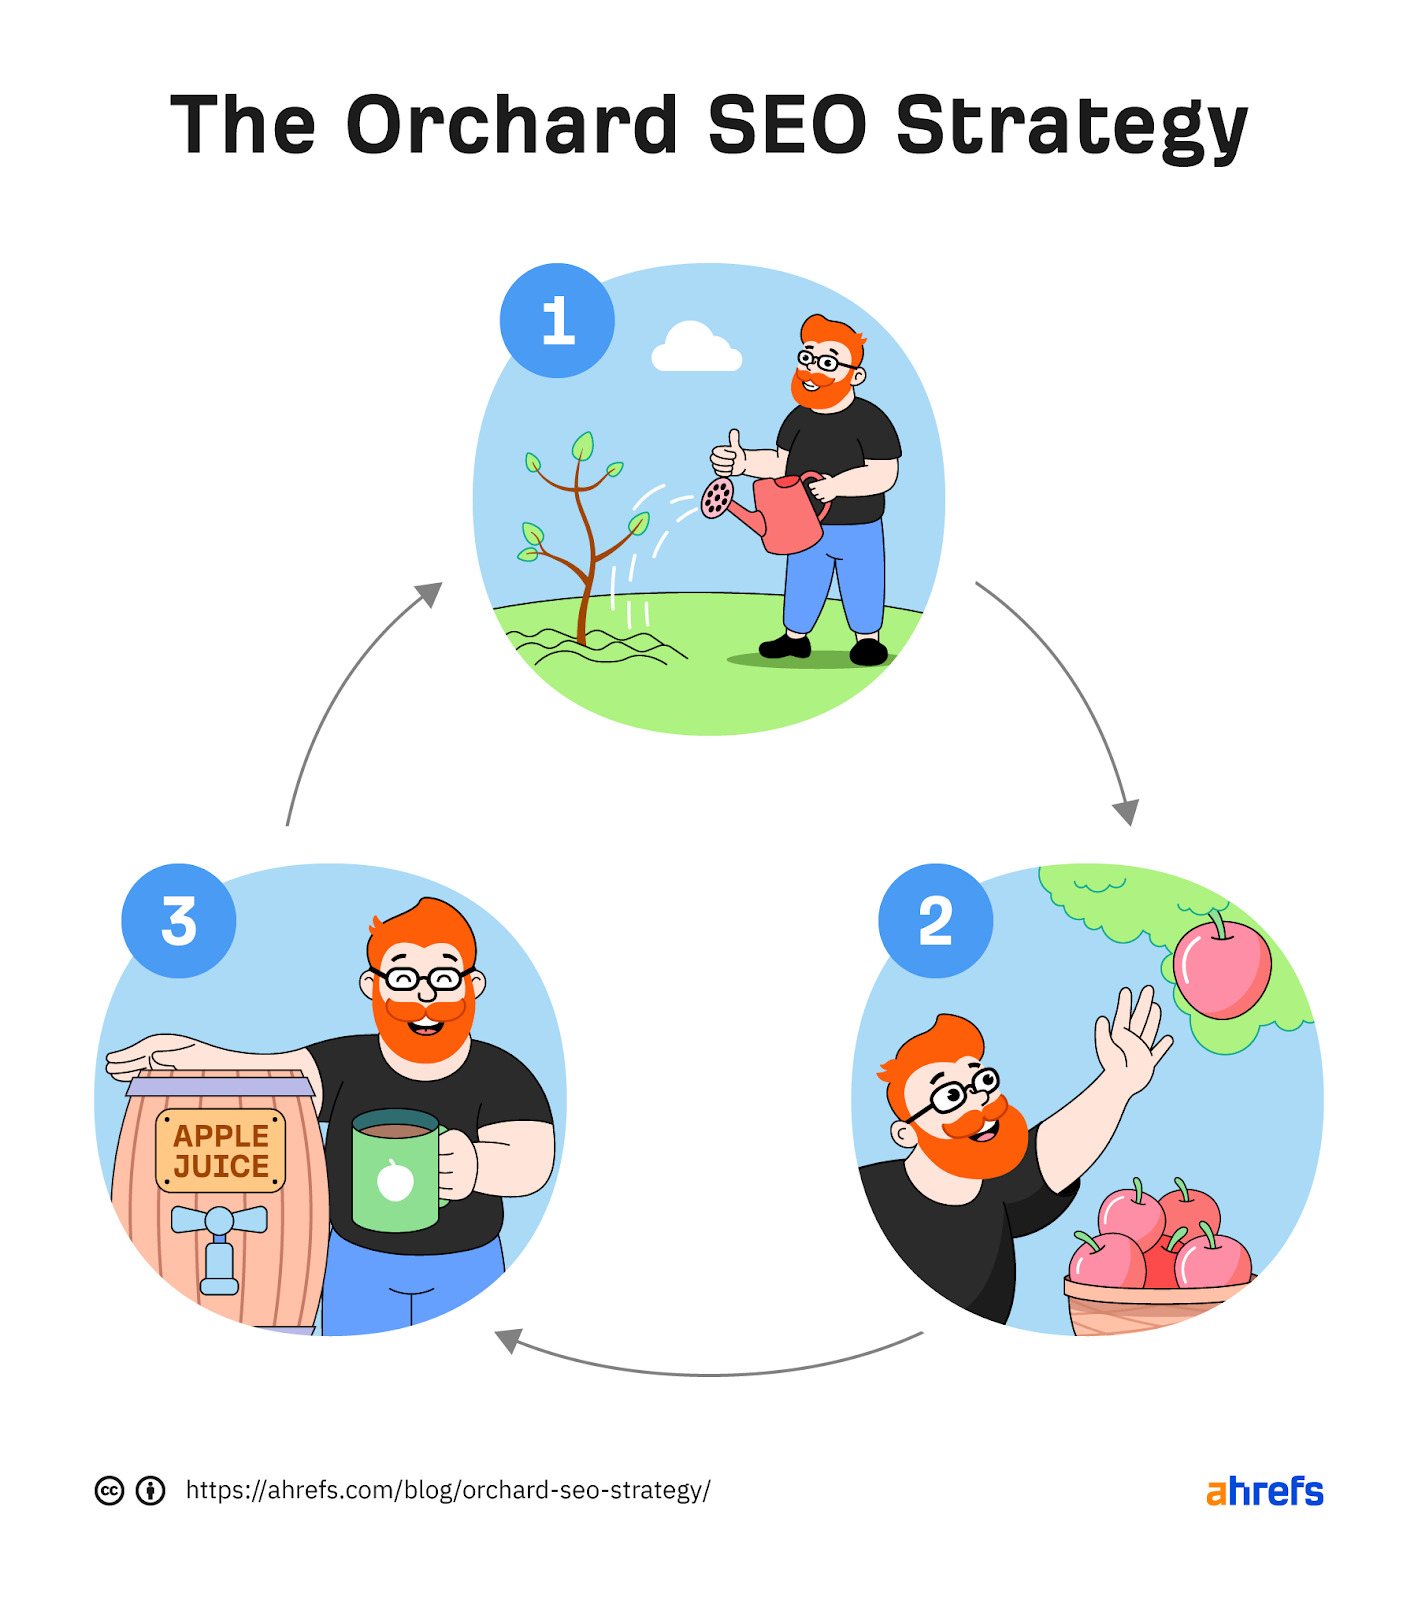 How the Orchard SEO Strategy works